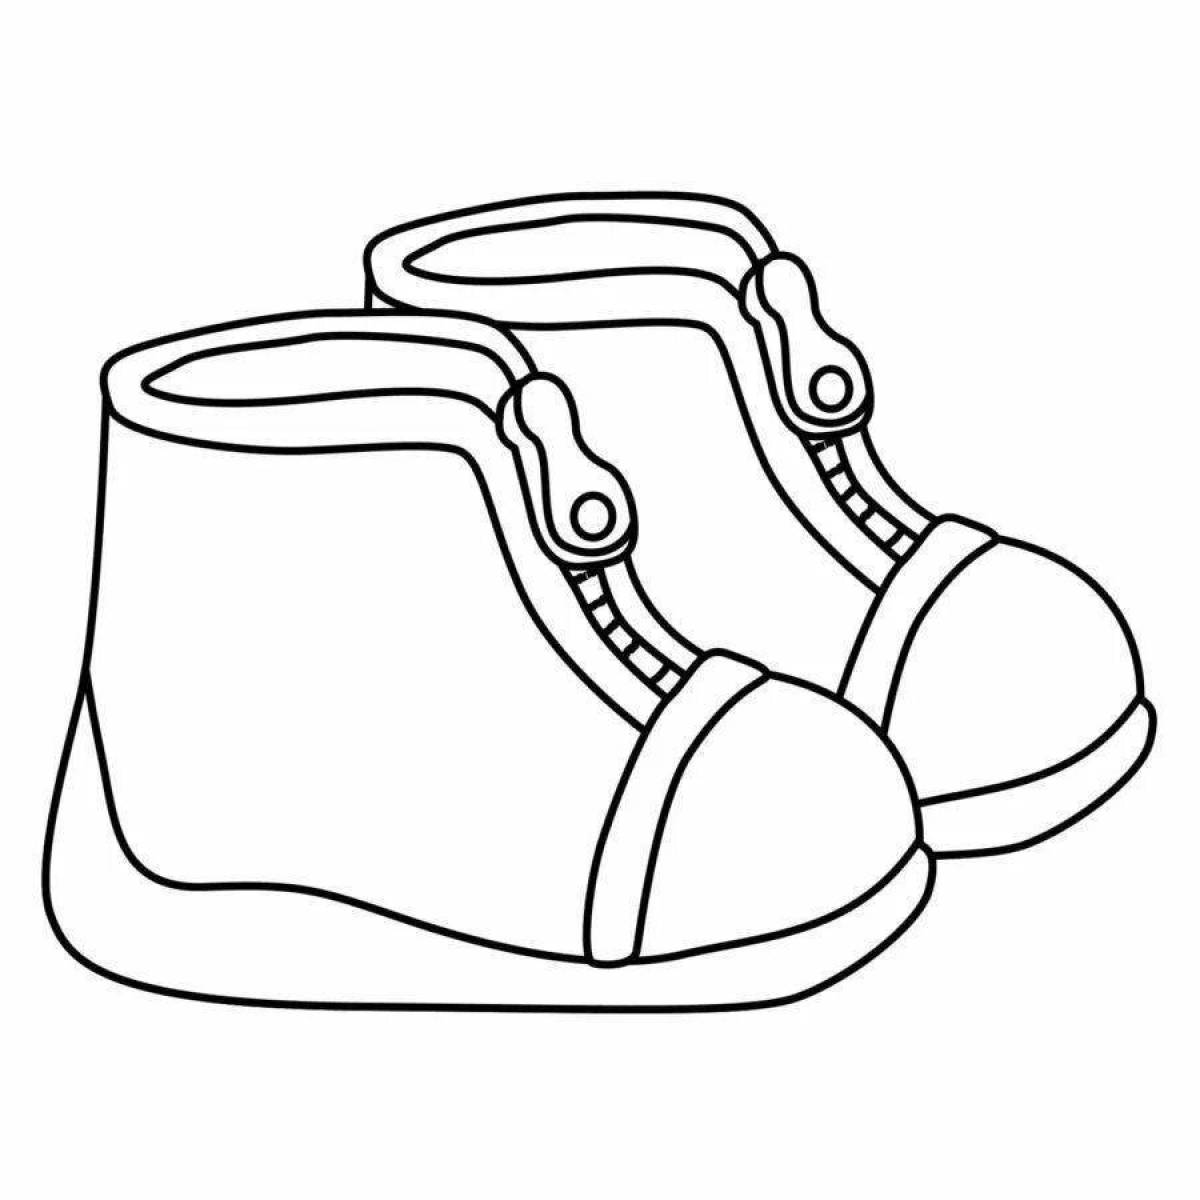 Amazing shoe coloring pages for kids 5-6 years old